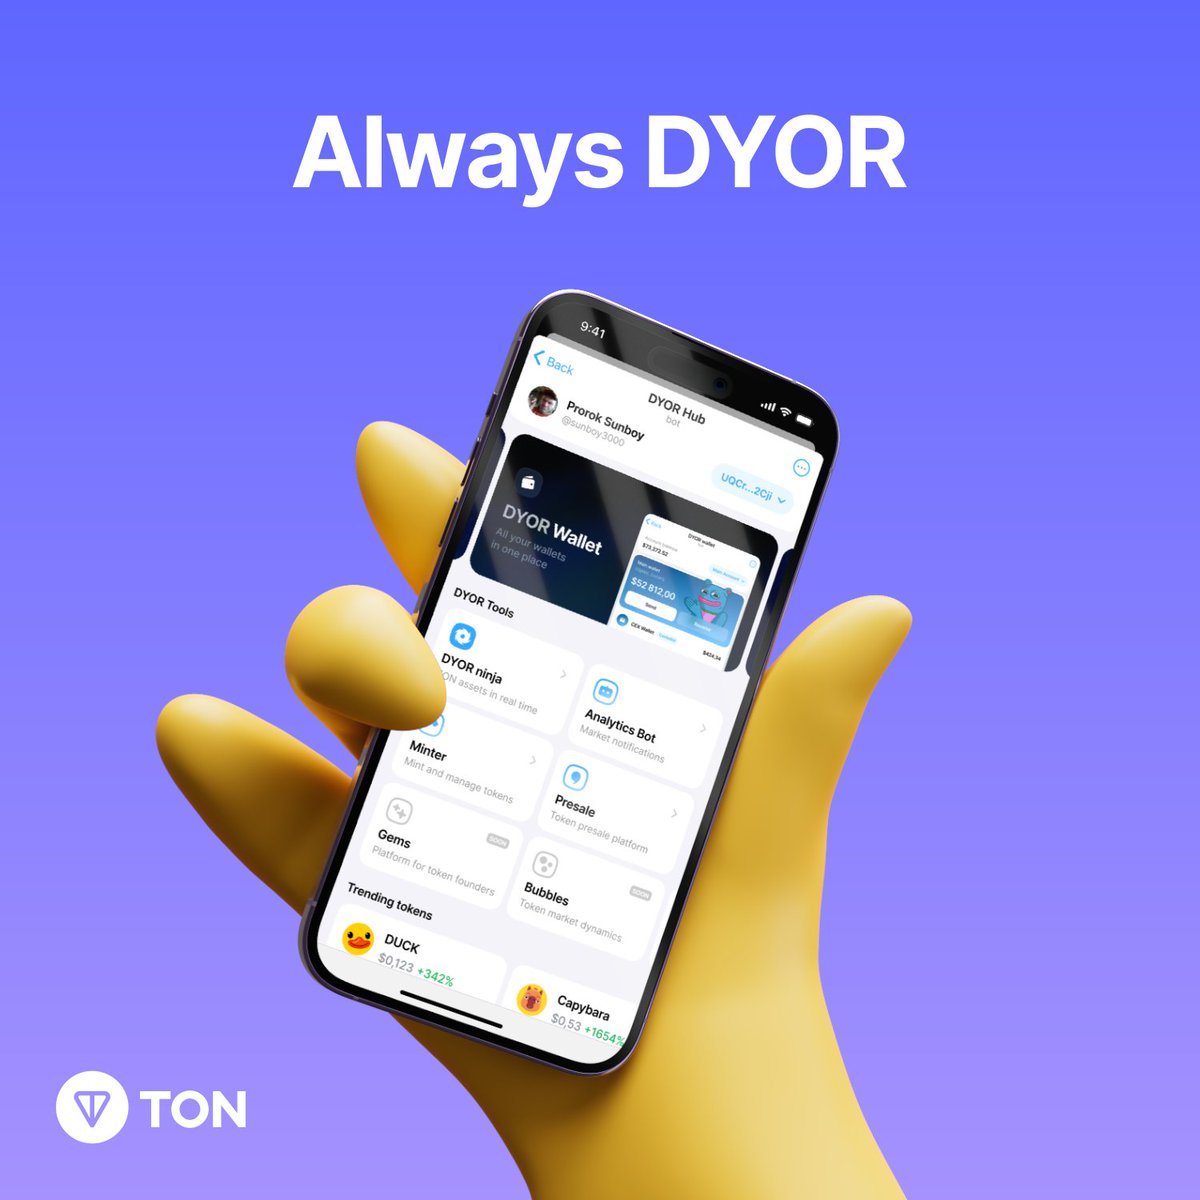 Introducing @dyorninja, a native data and asset analysis platform on #TON 🥷

You can now explore comprehensive data on tokens, with upcoming features for NFTs and dApps. Since its launch, DYOR boasts 1M+ views and has attracted 100K+ unique users last month alone.